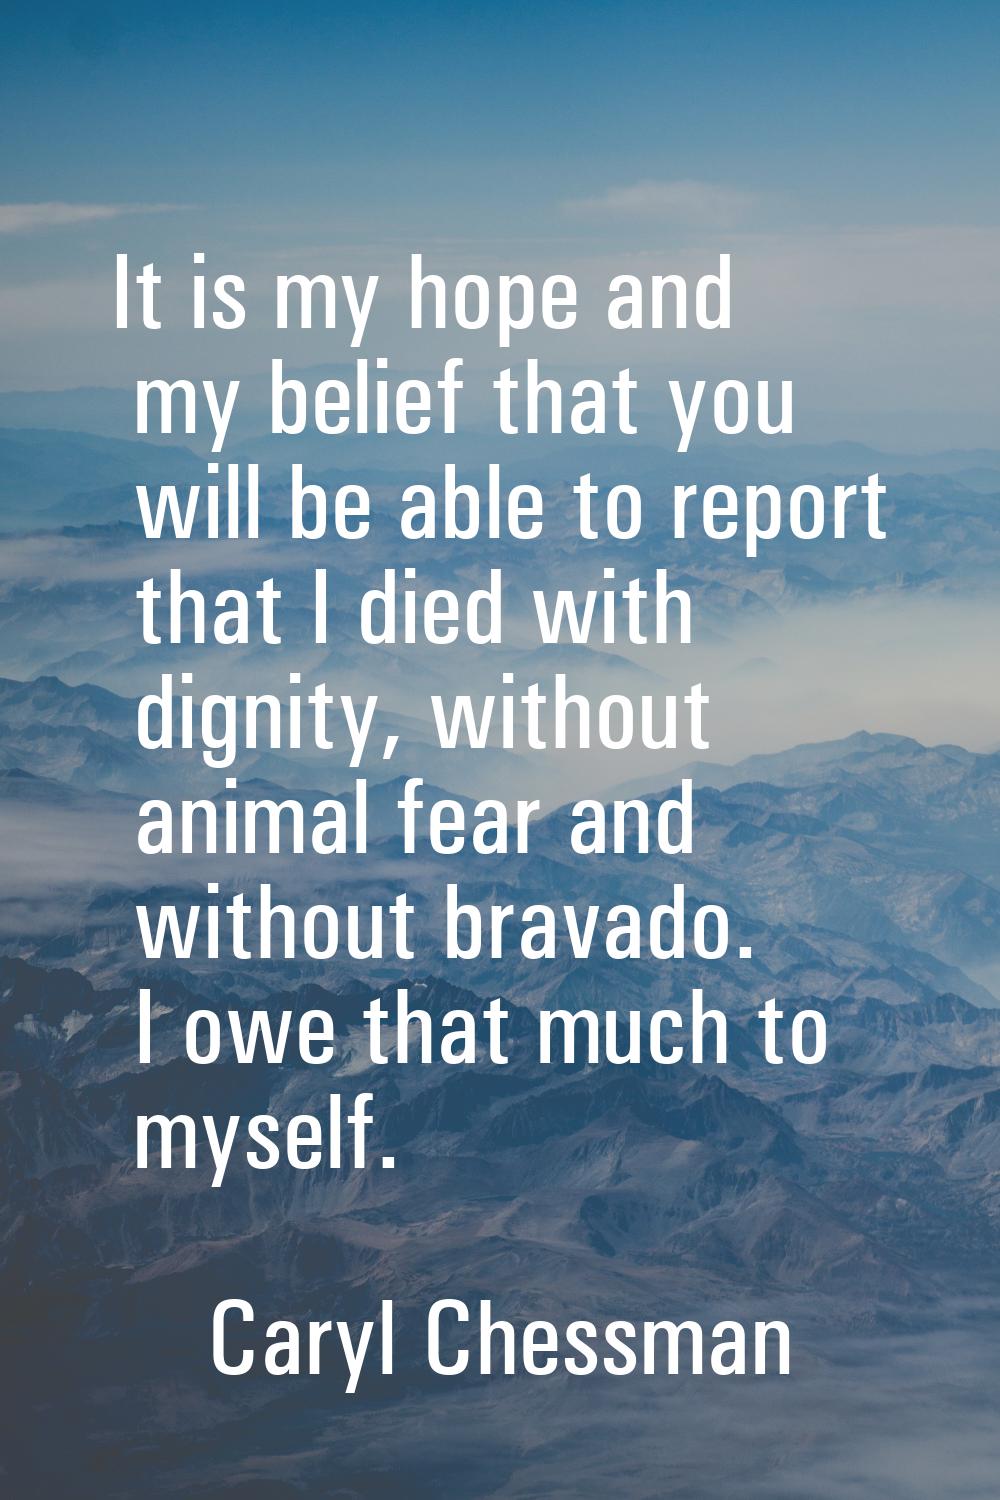 It is my hope and my belief that you will be able to report that I died with dignity, without anima